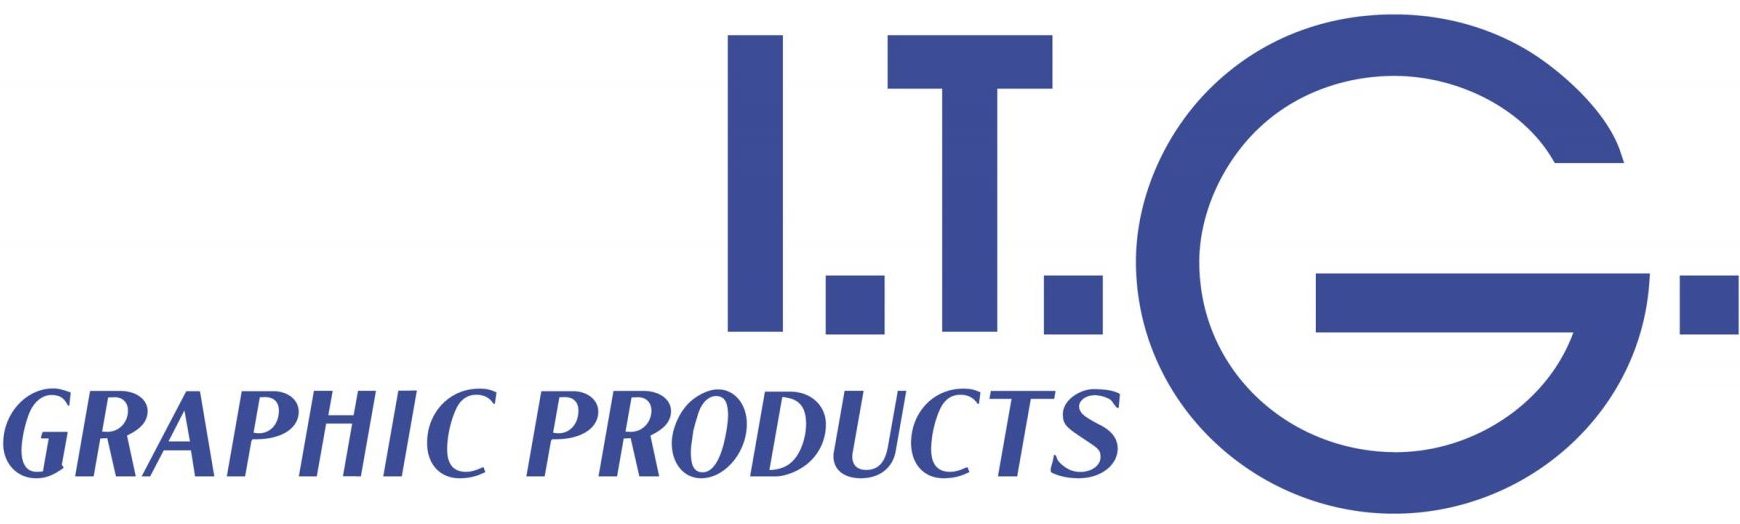 Graphic products. ITG (inline Technologies Group).